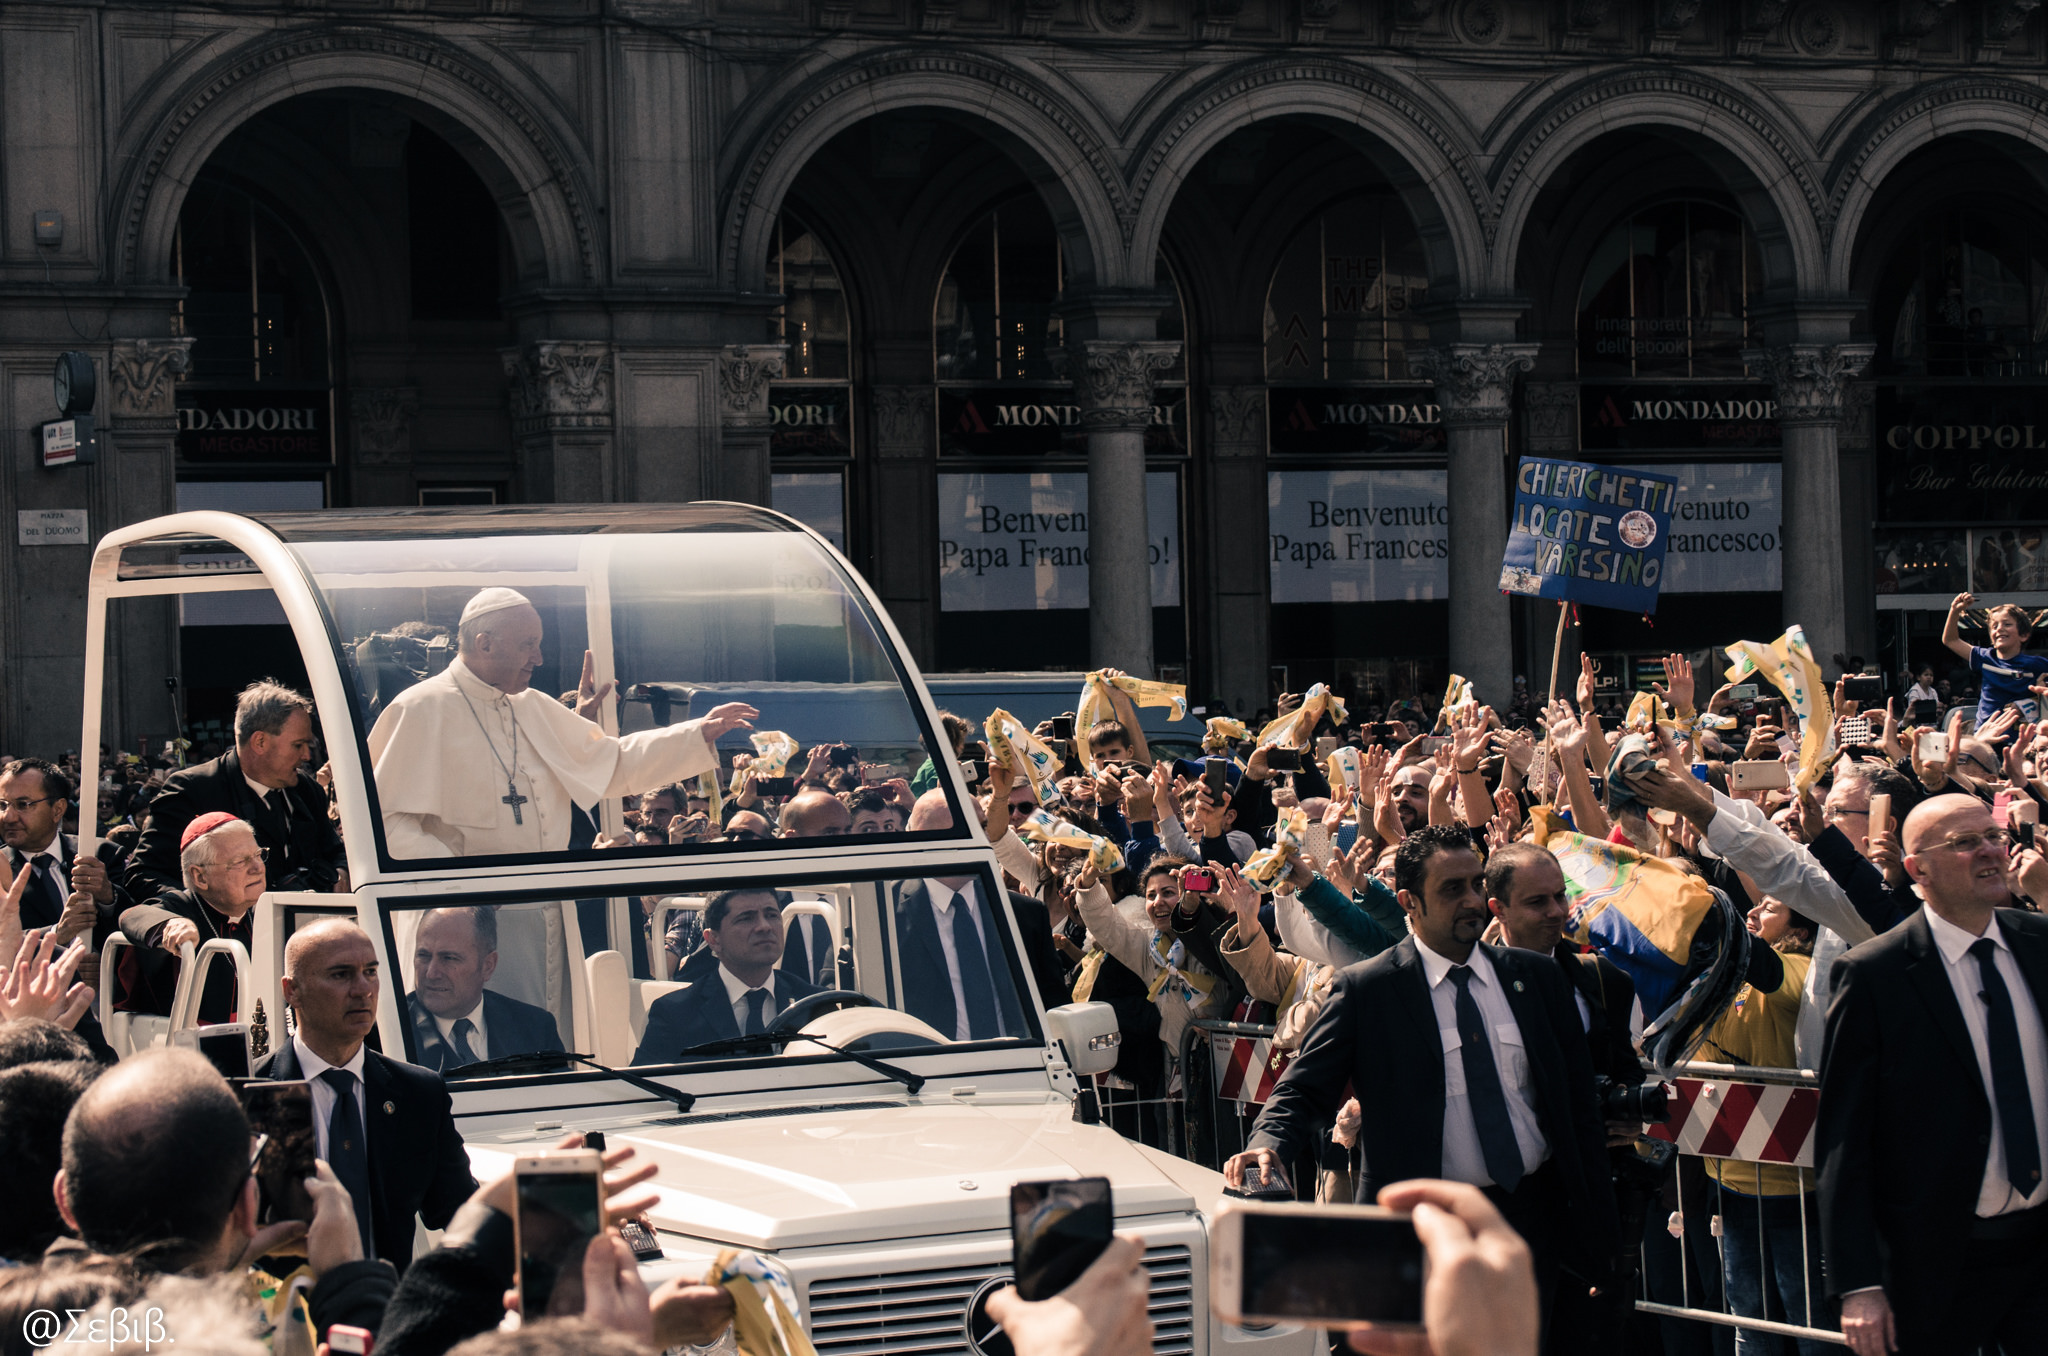 The Pope, the Mafia, and the Rest of Us - The Chicago Divinity School